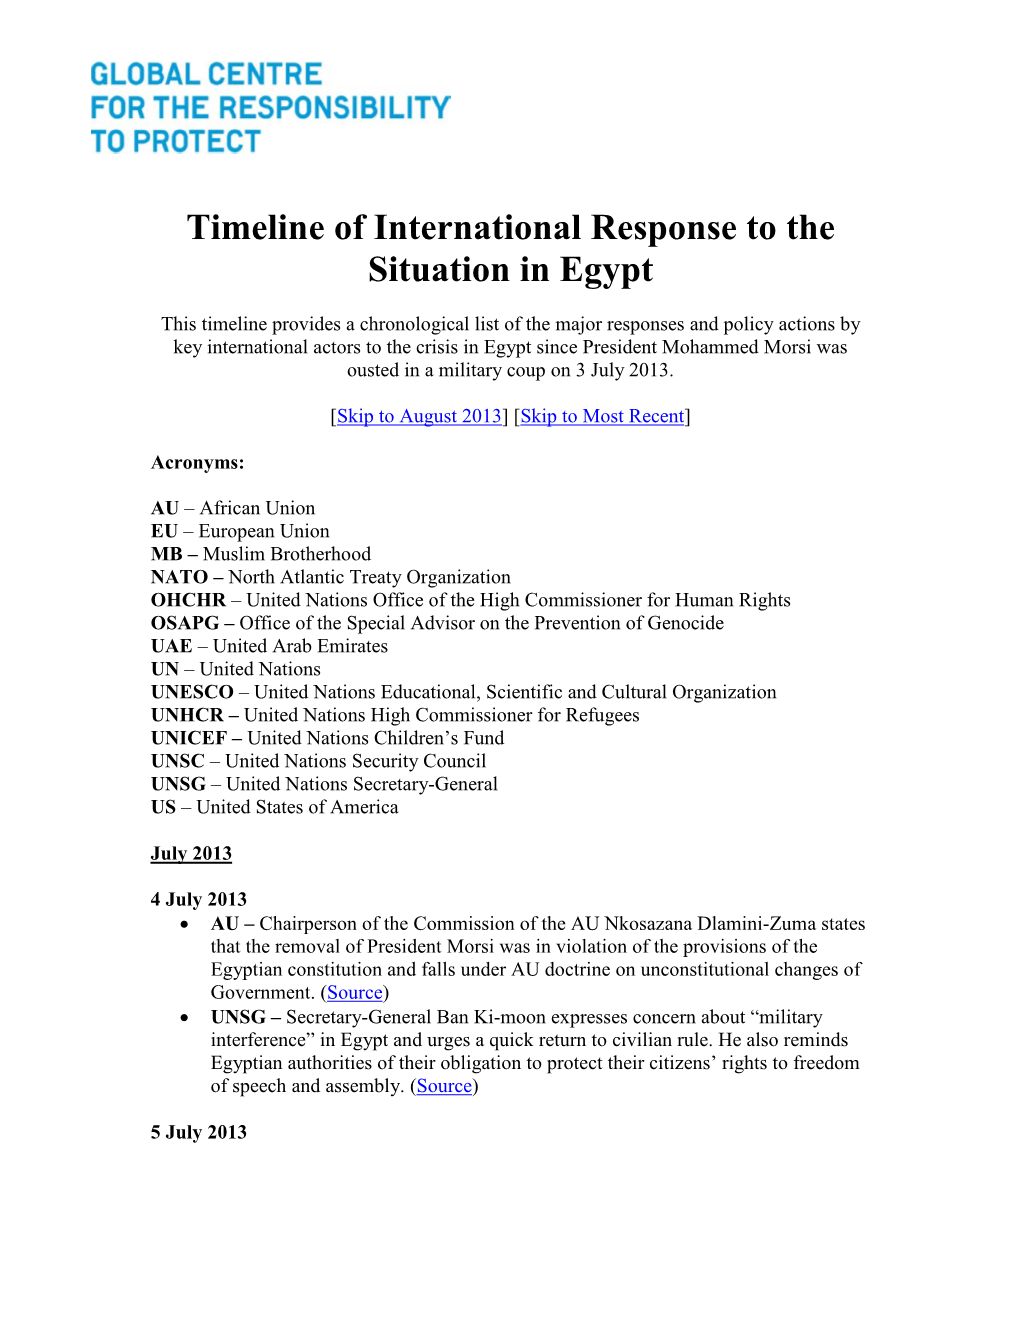 Timeline of International Response to the Situation in Egypt [PDF]